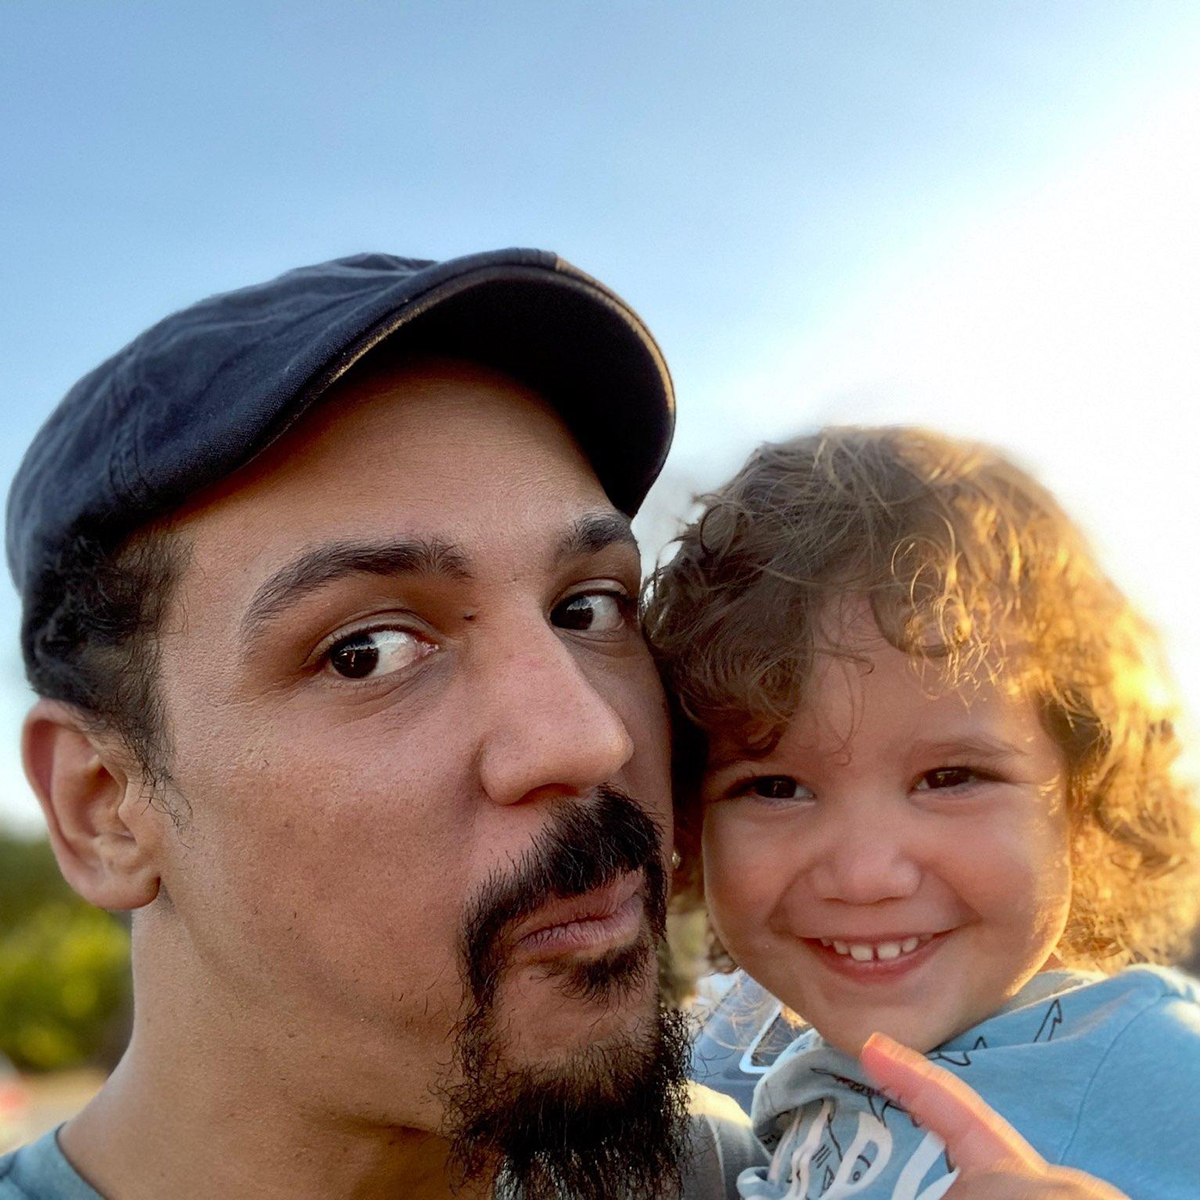 CARE-CDL-Dad and son in sunshine-2019_large